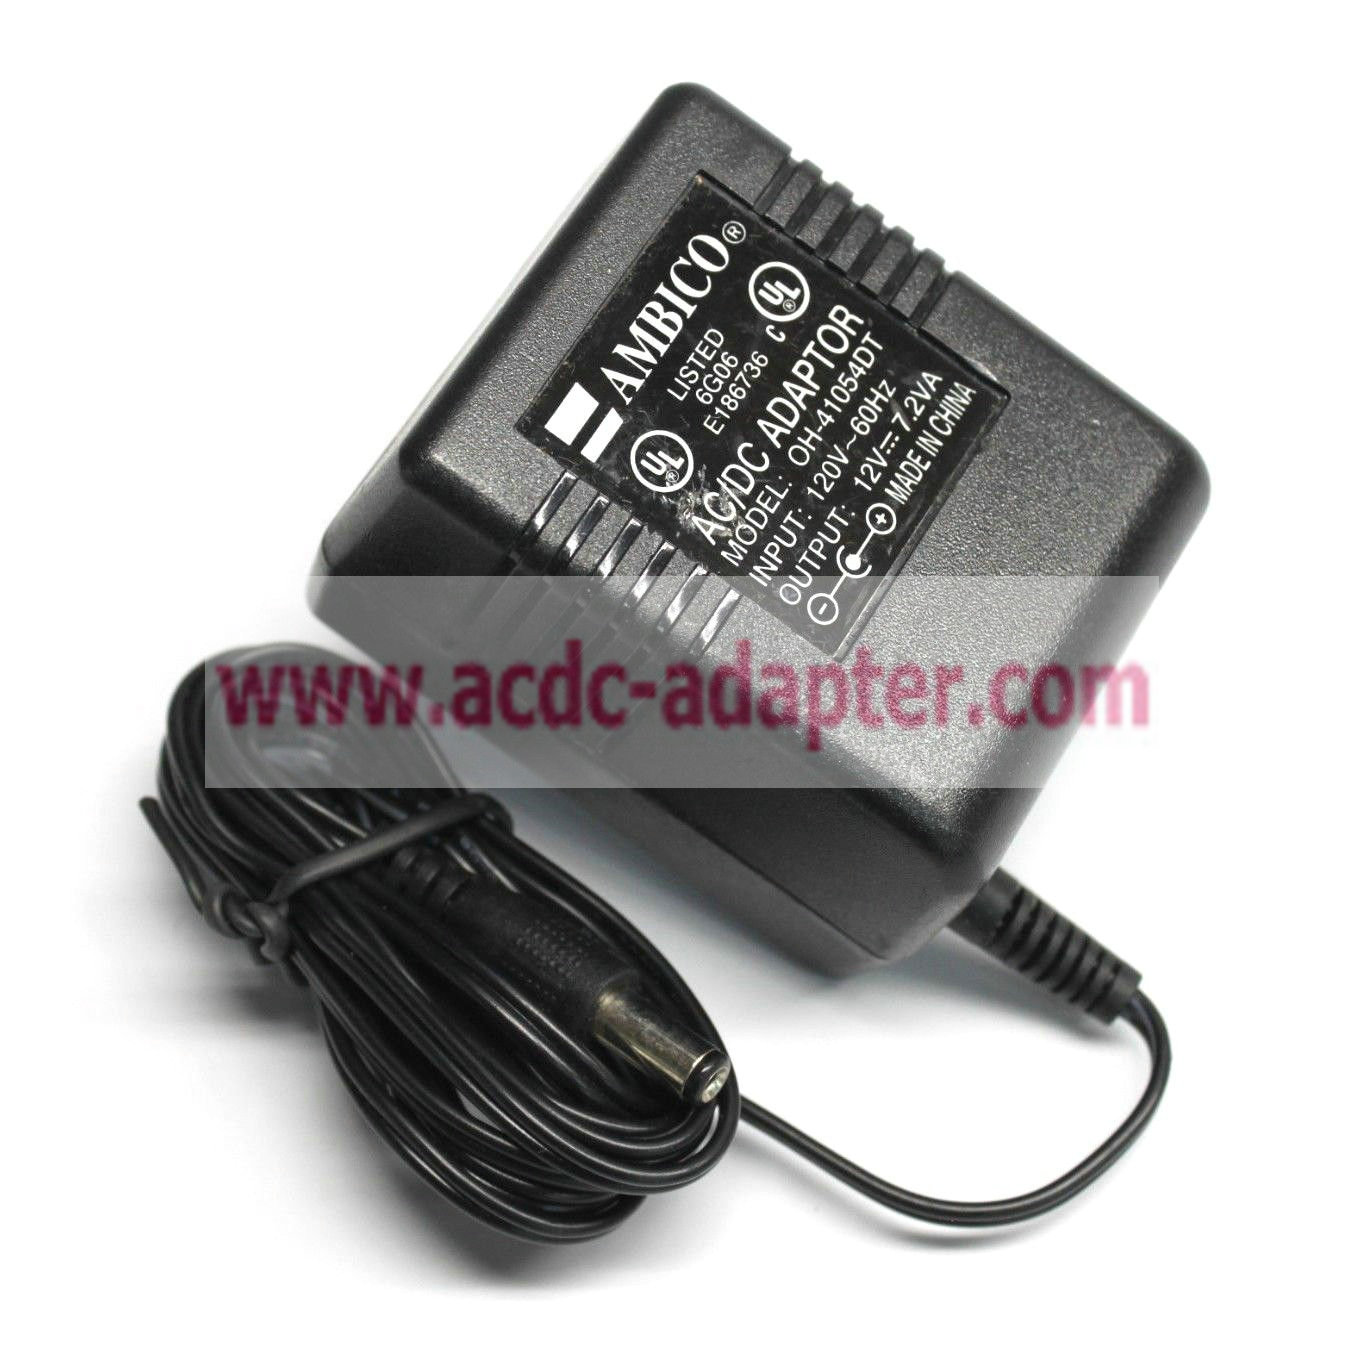 Original 12 Volts 7.2 VA Ambico OH-41054DT AC Adapter Power Supply Wall Charger